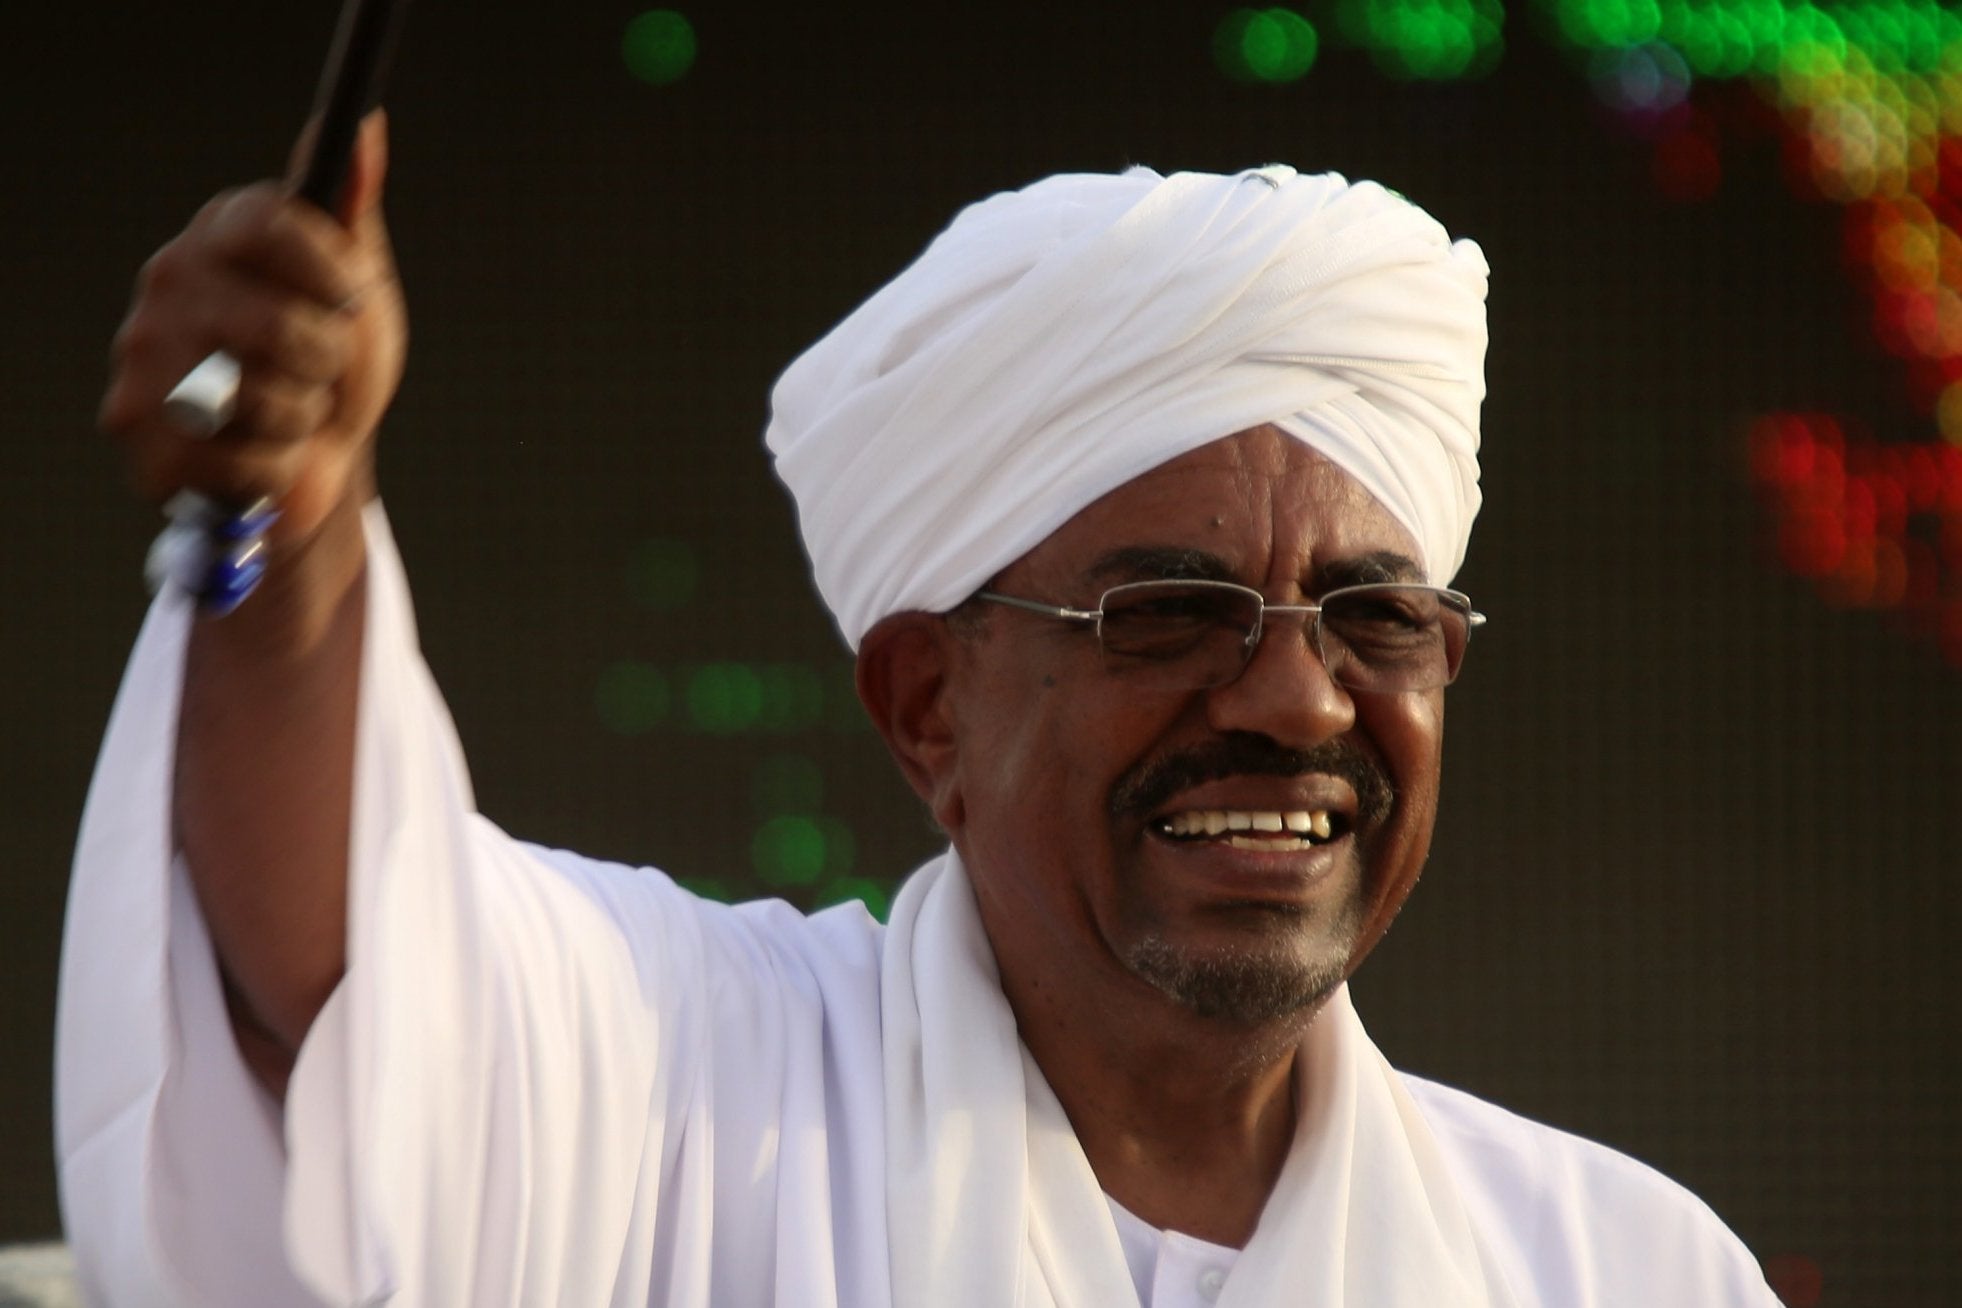 Omar al-Bashir’s departure comes little more than a week after mass protests forced out Algeria’s longtime president, Abdelaziz Bouteflika, in a manoeuvre also orchestrated by the country’s armed forces